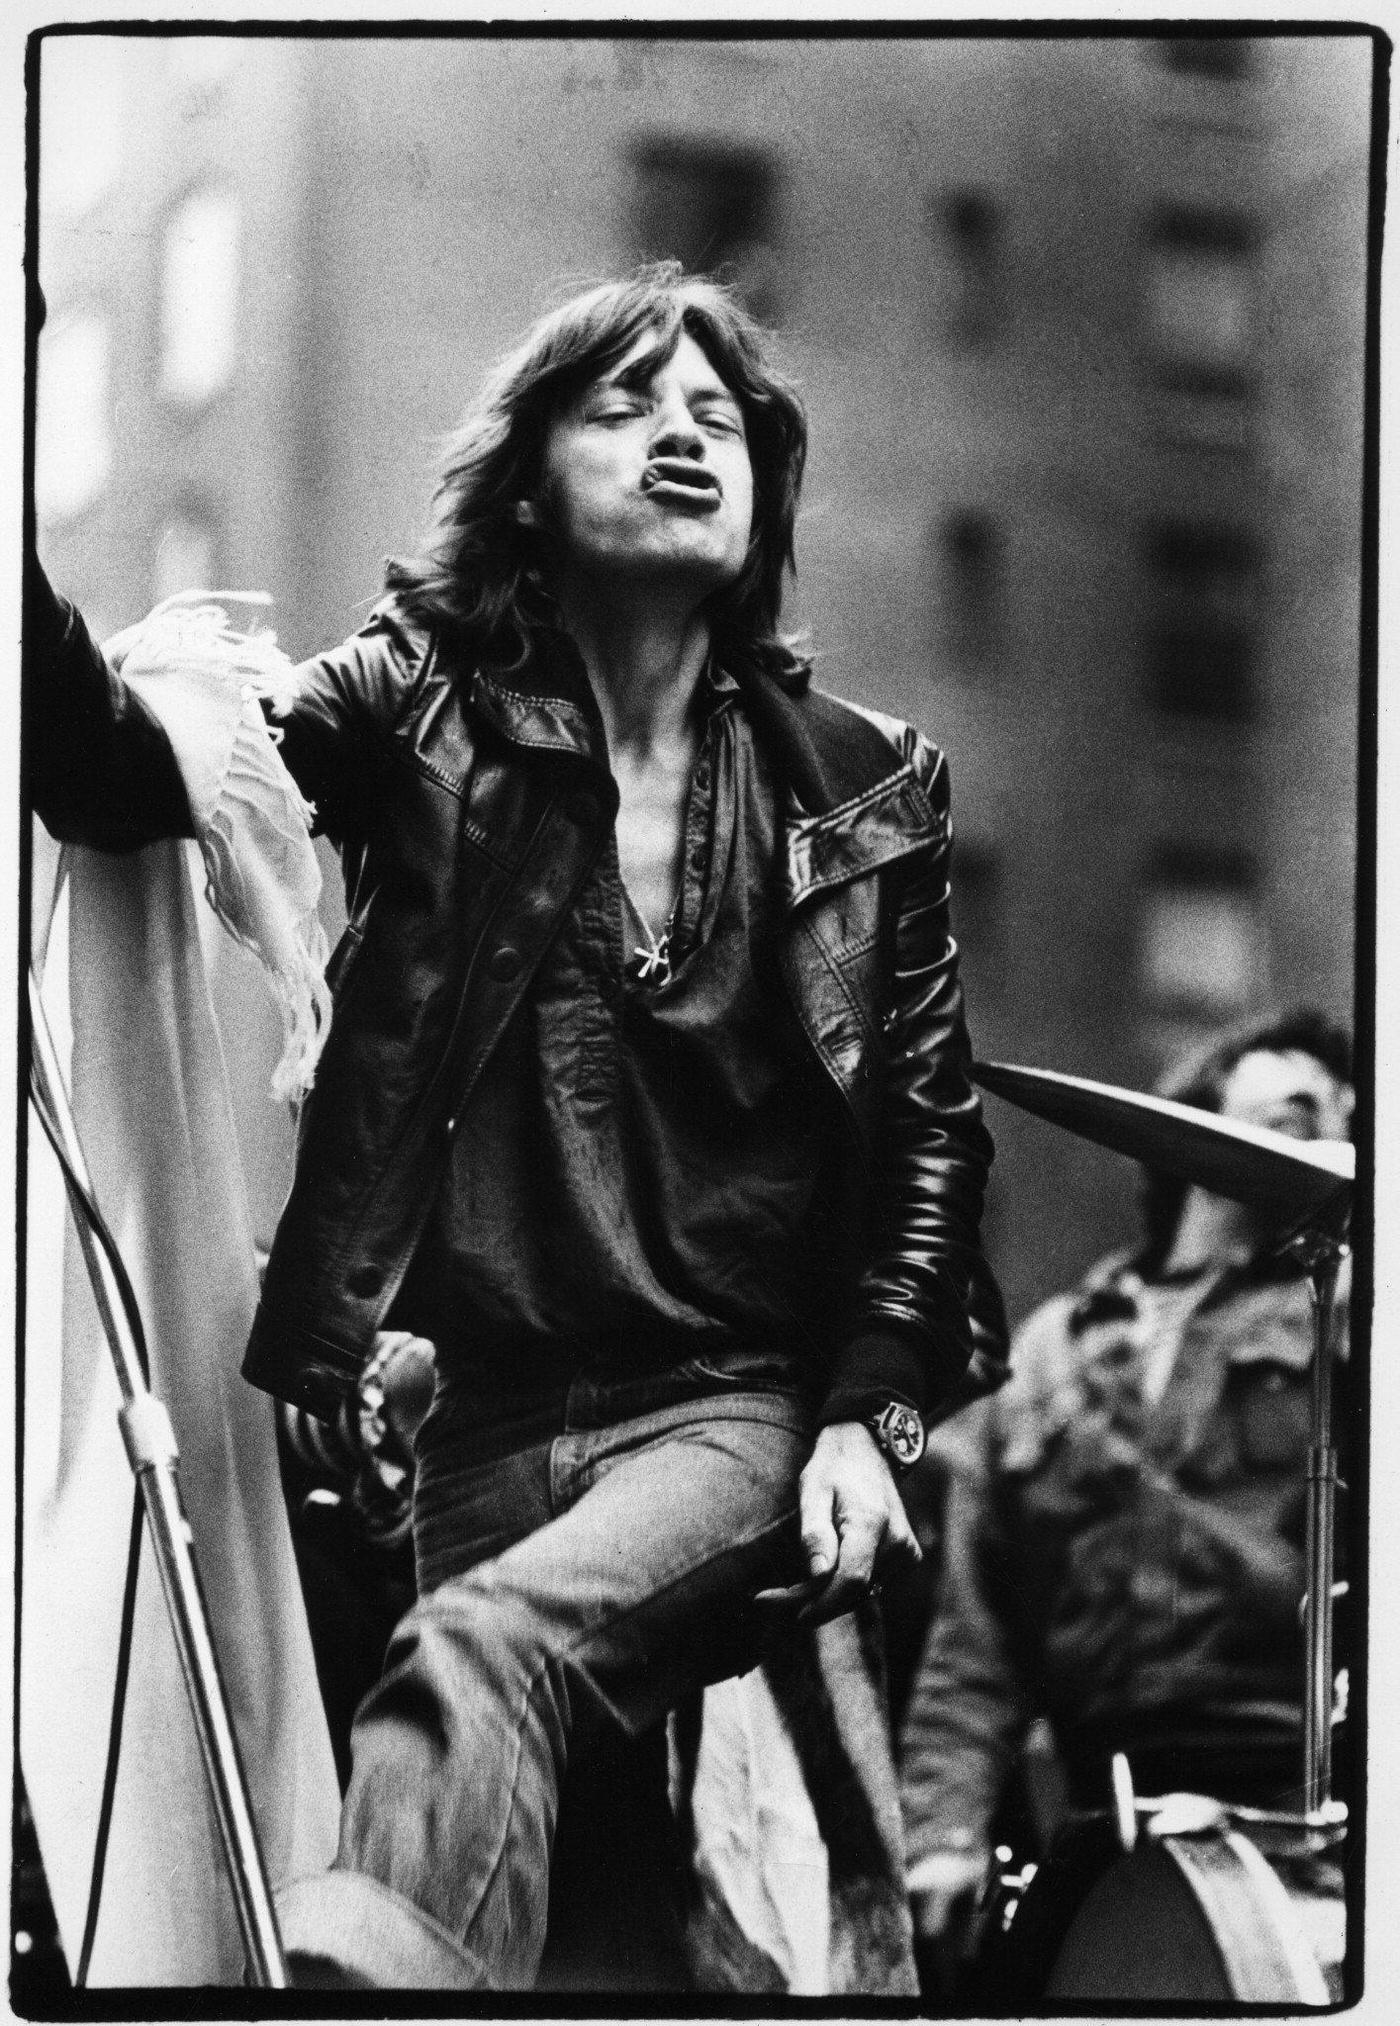 Mick Jagger performs on a flatbed truck to announce the 'Tour of the Americas '75,' New York, May 1975.